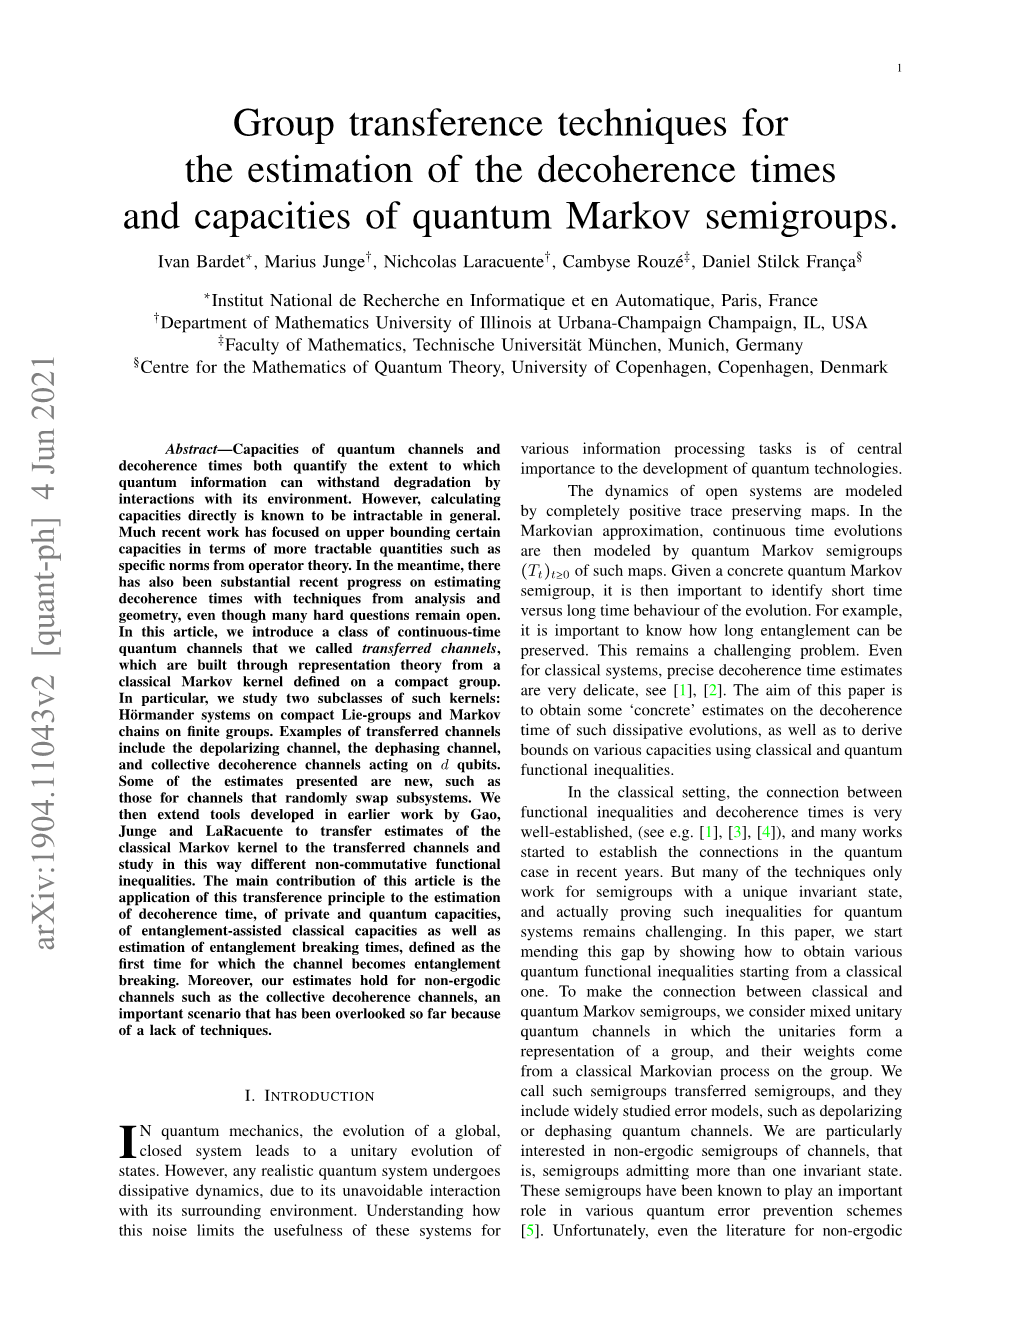 Group Transference Techniques for the Estimation of the Decoherence Times and Capacities of Quantum Markov Semigroups